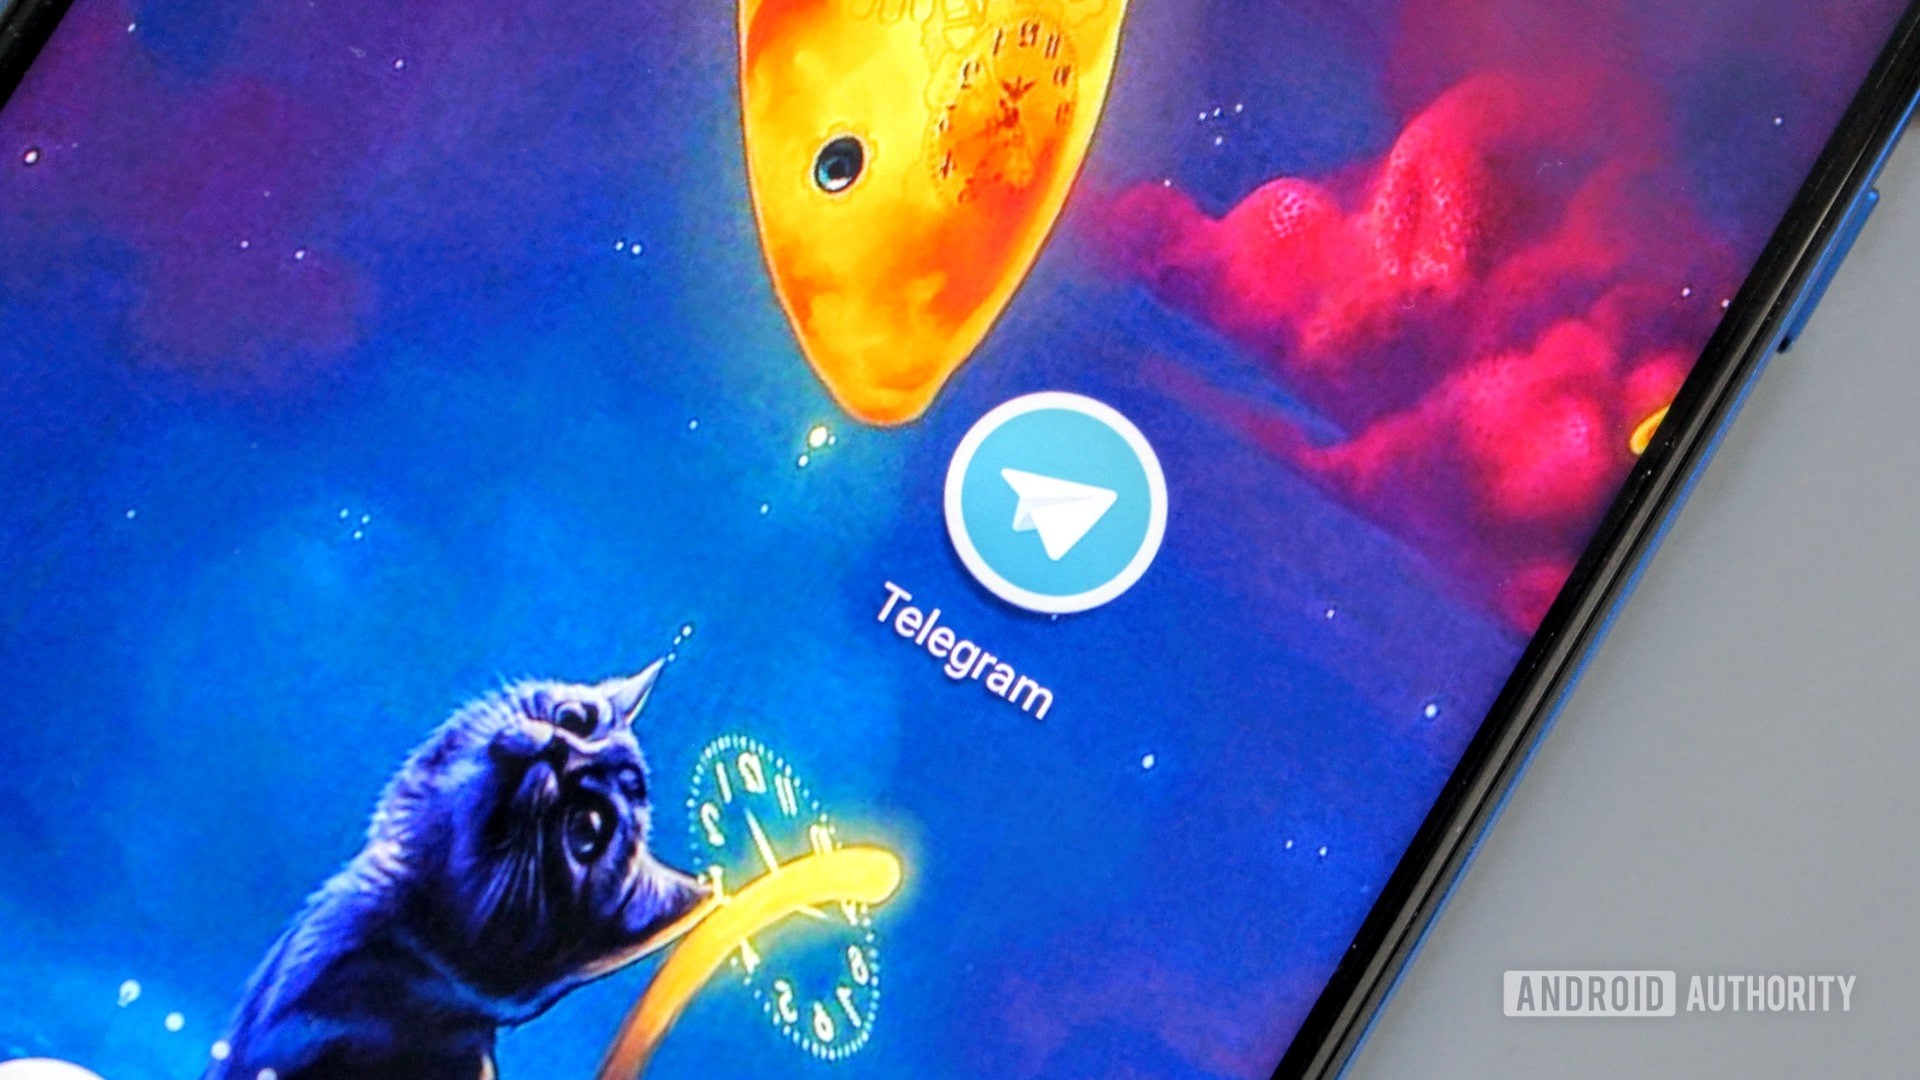 The Telegram icon on an HONOR View 20 on a blue background with a cat and a fish.